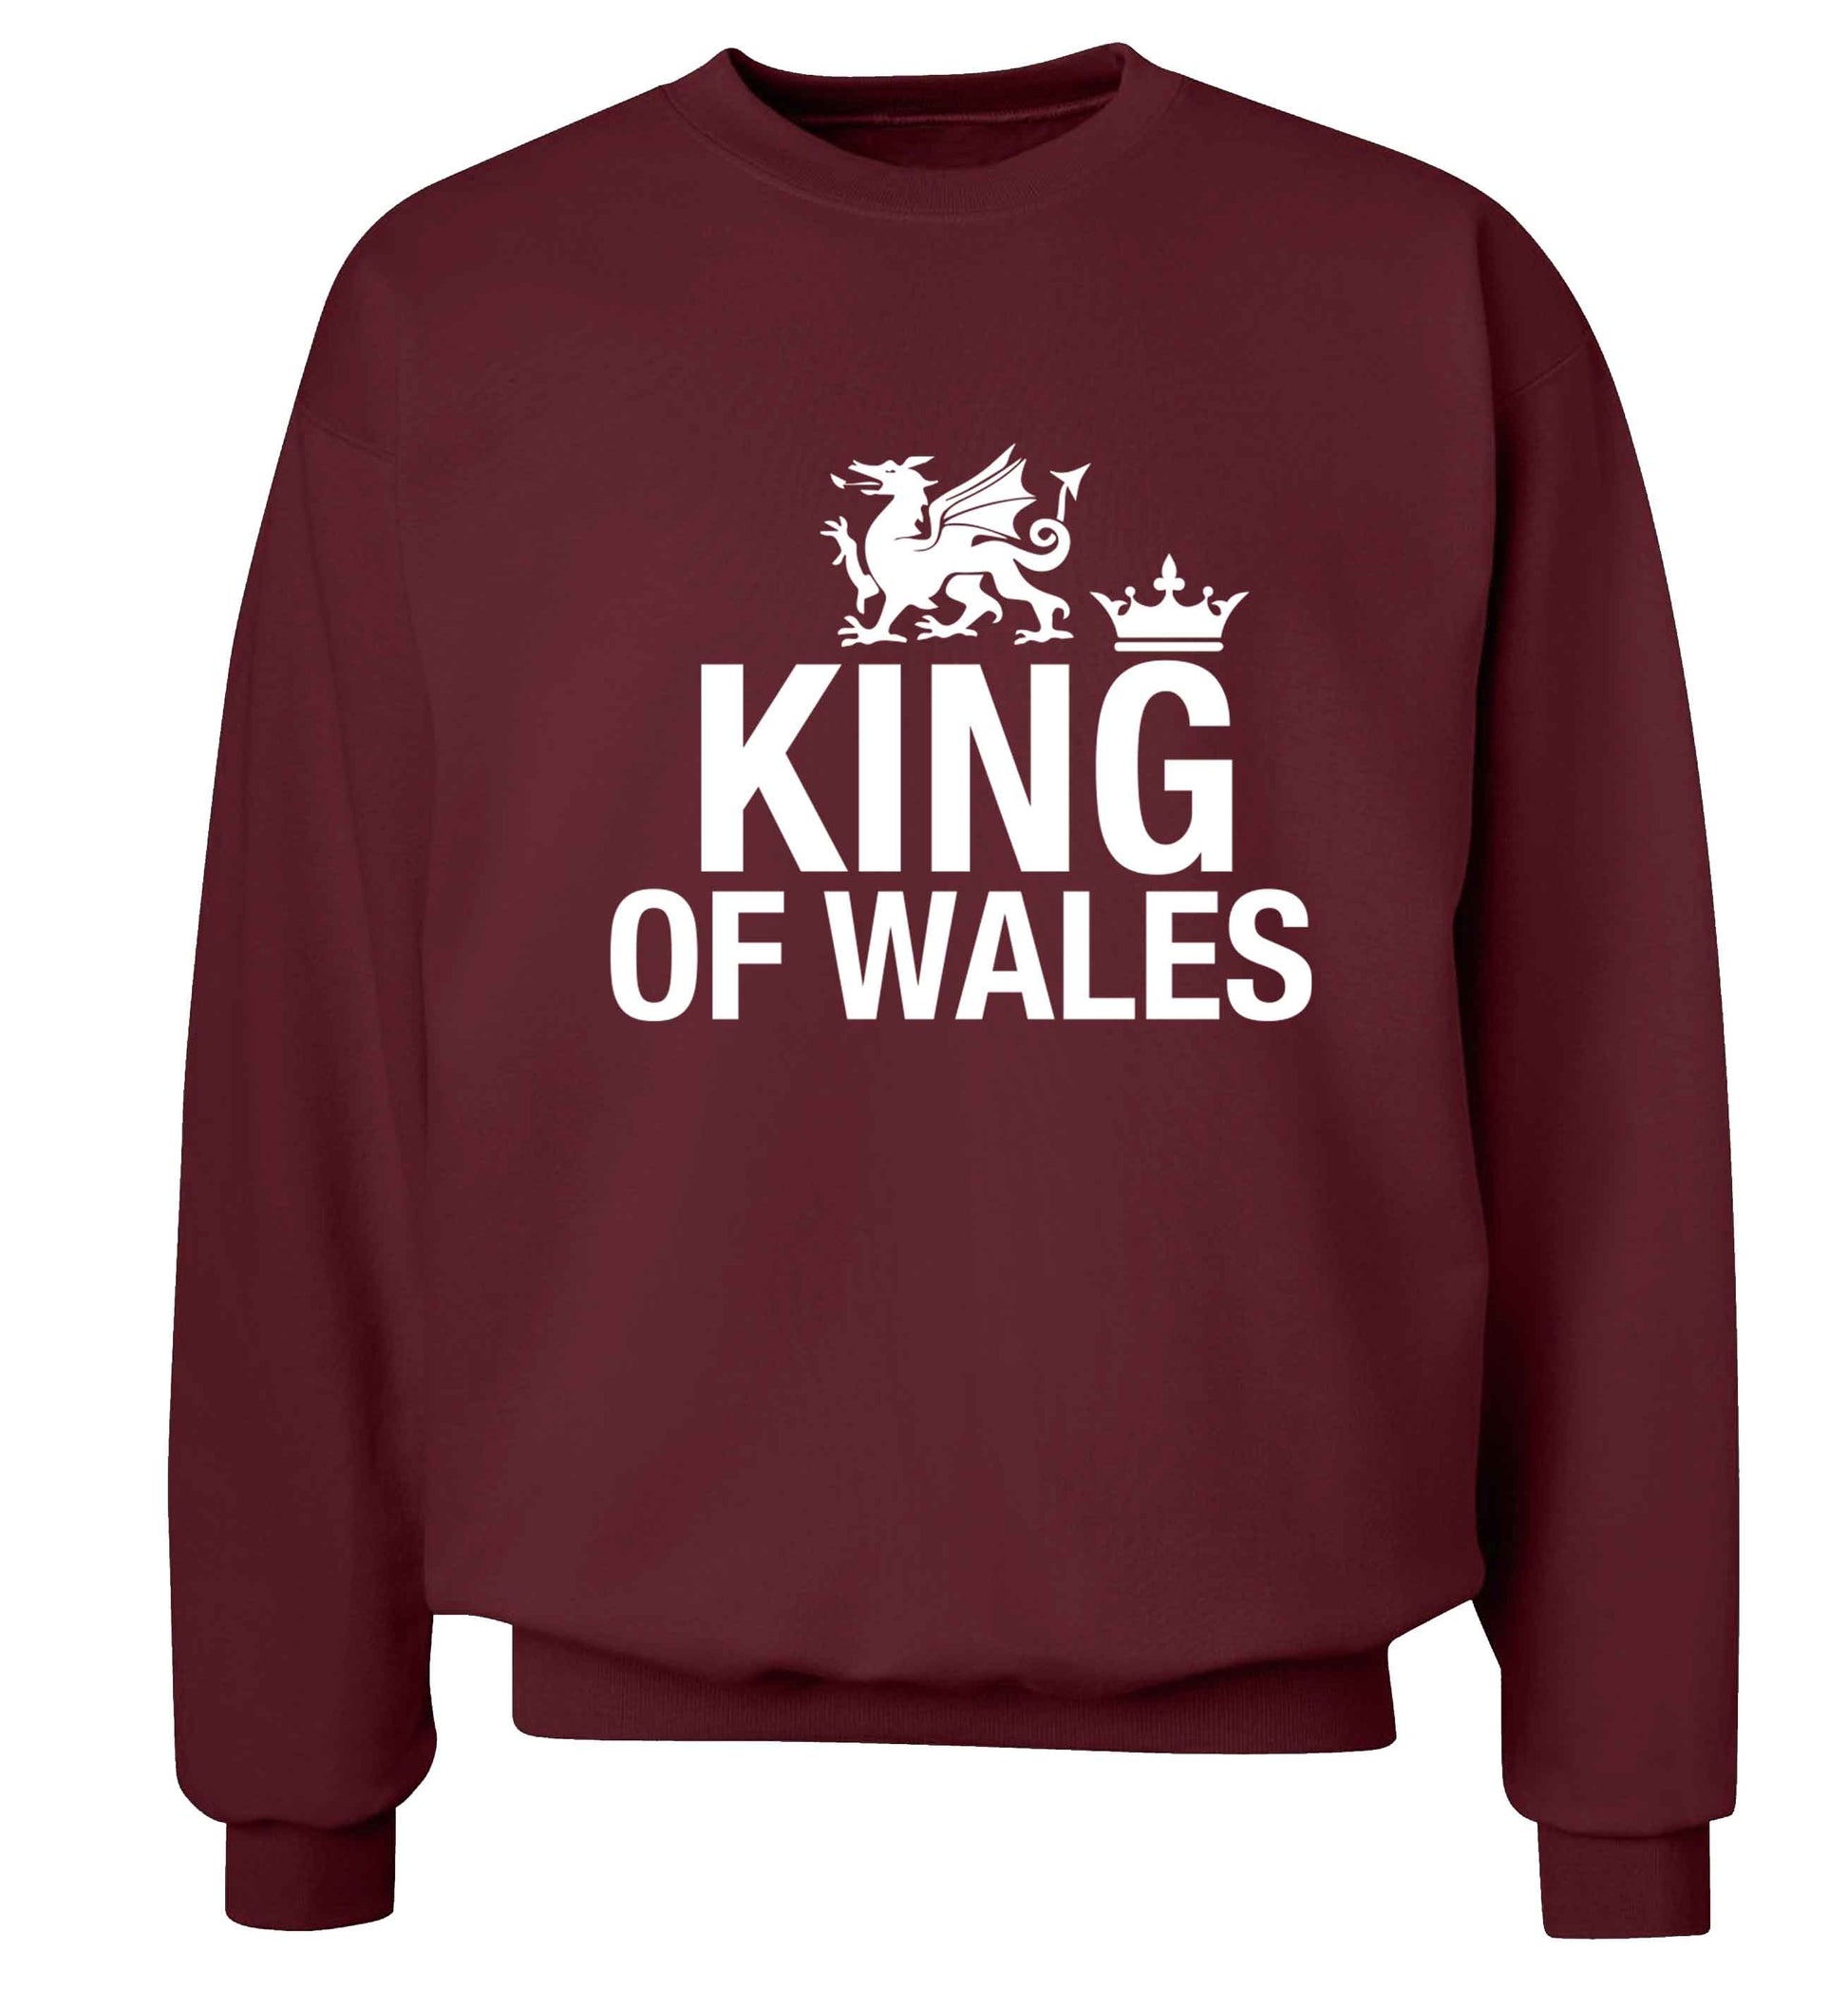 King of Wales Adult's unisex maroon Sweater 2XL